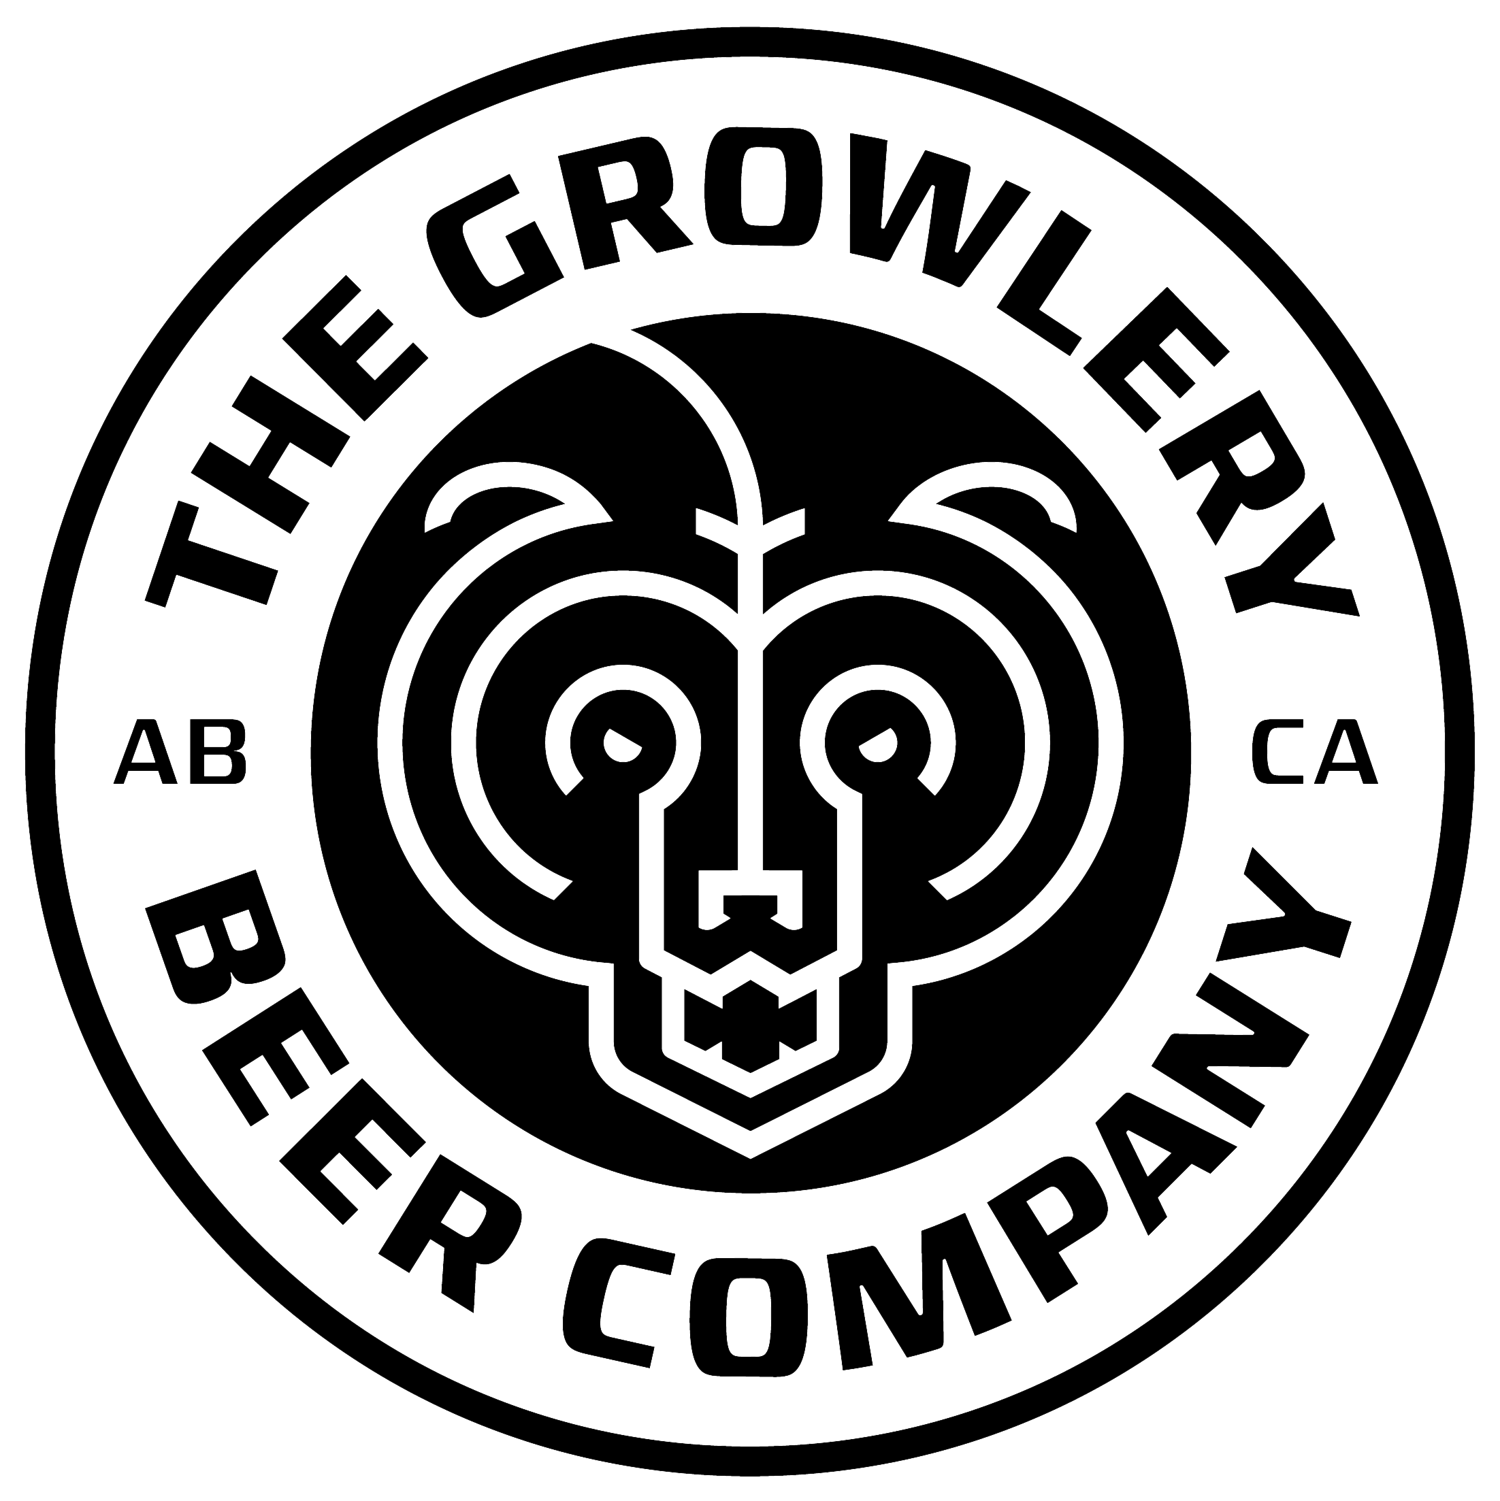 The Growlery Beer Co.